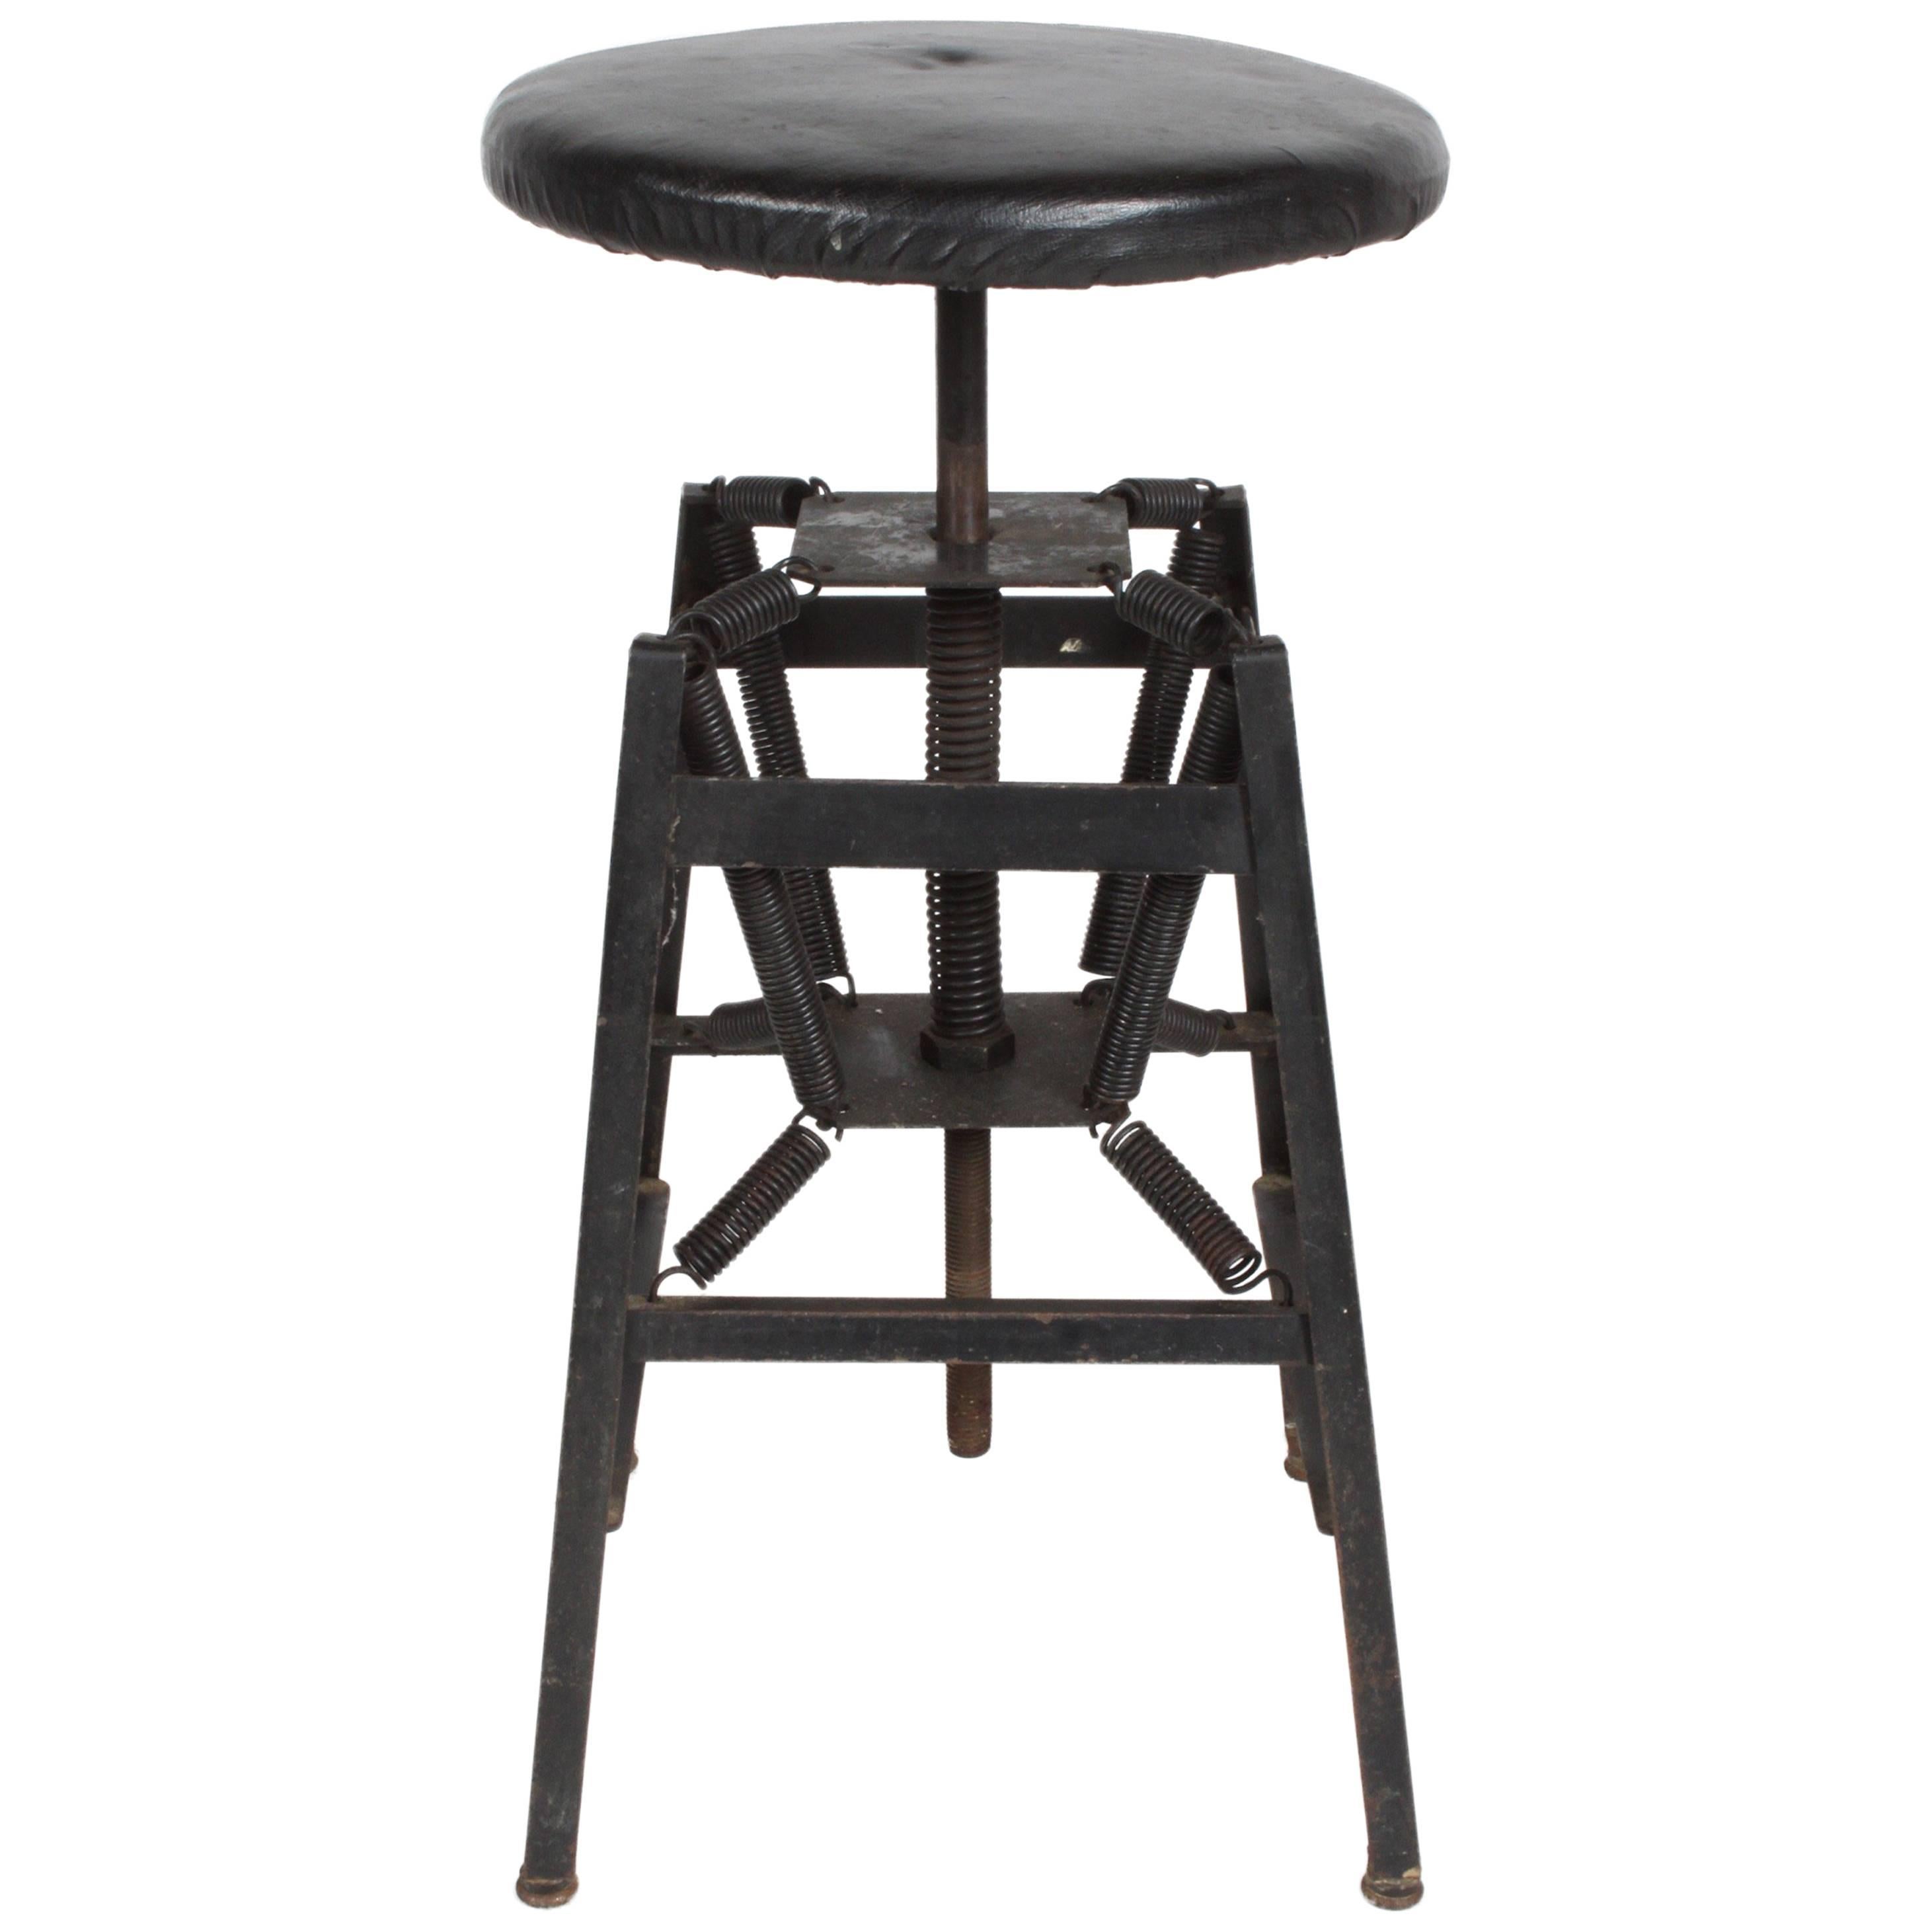 American Cabinet Co. Industrial Architects Drafting Spring Stool